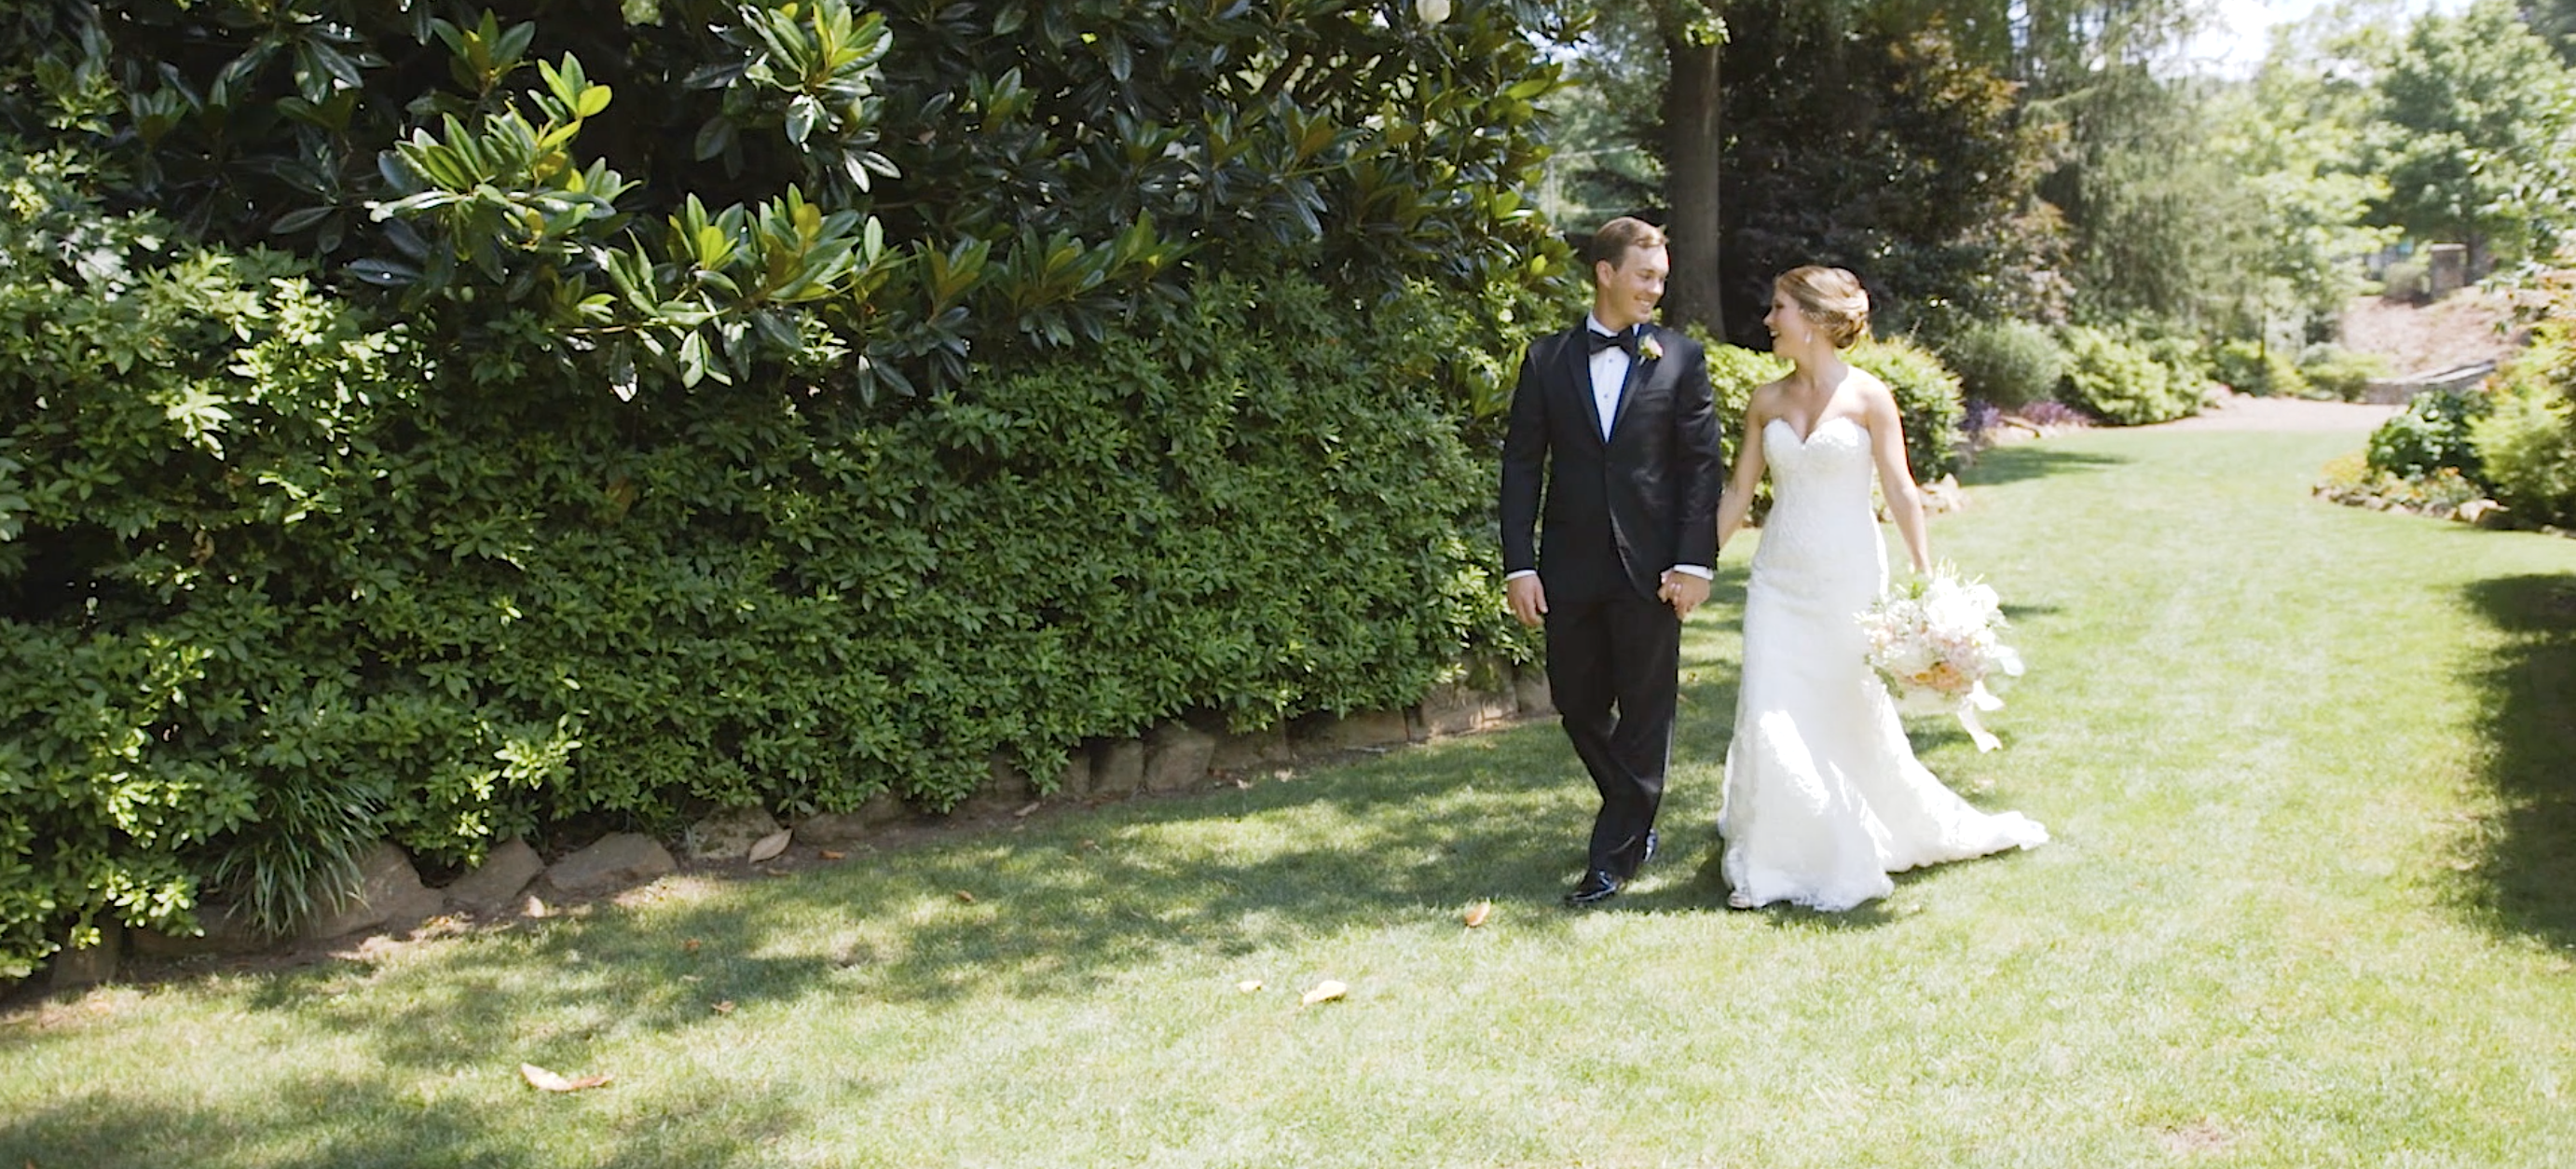 Bride and groom walking together hire a wedding videographer